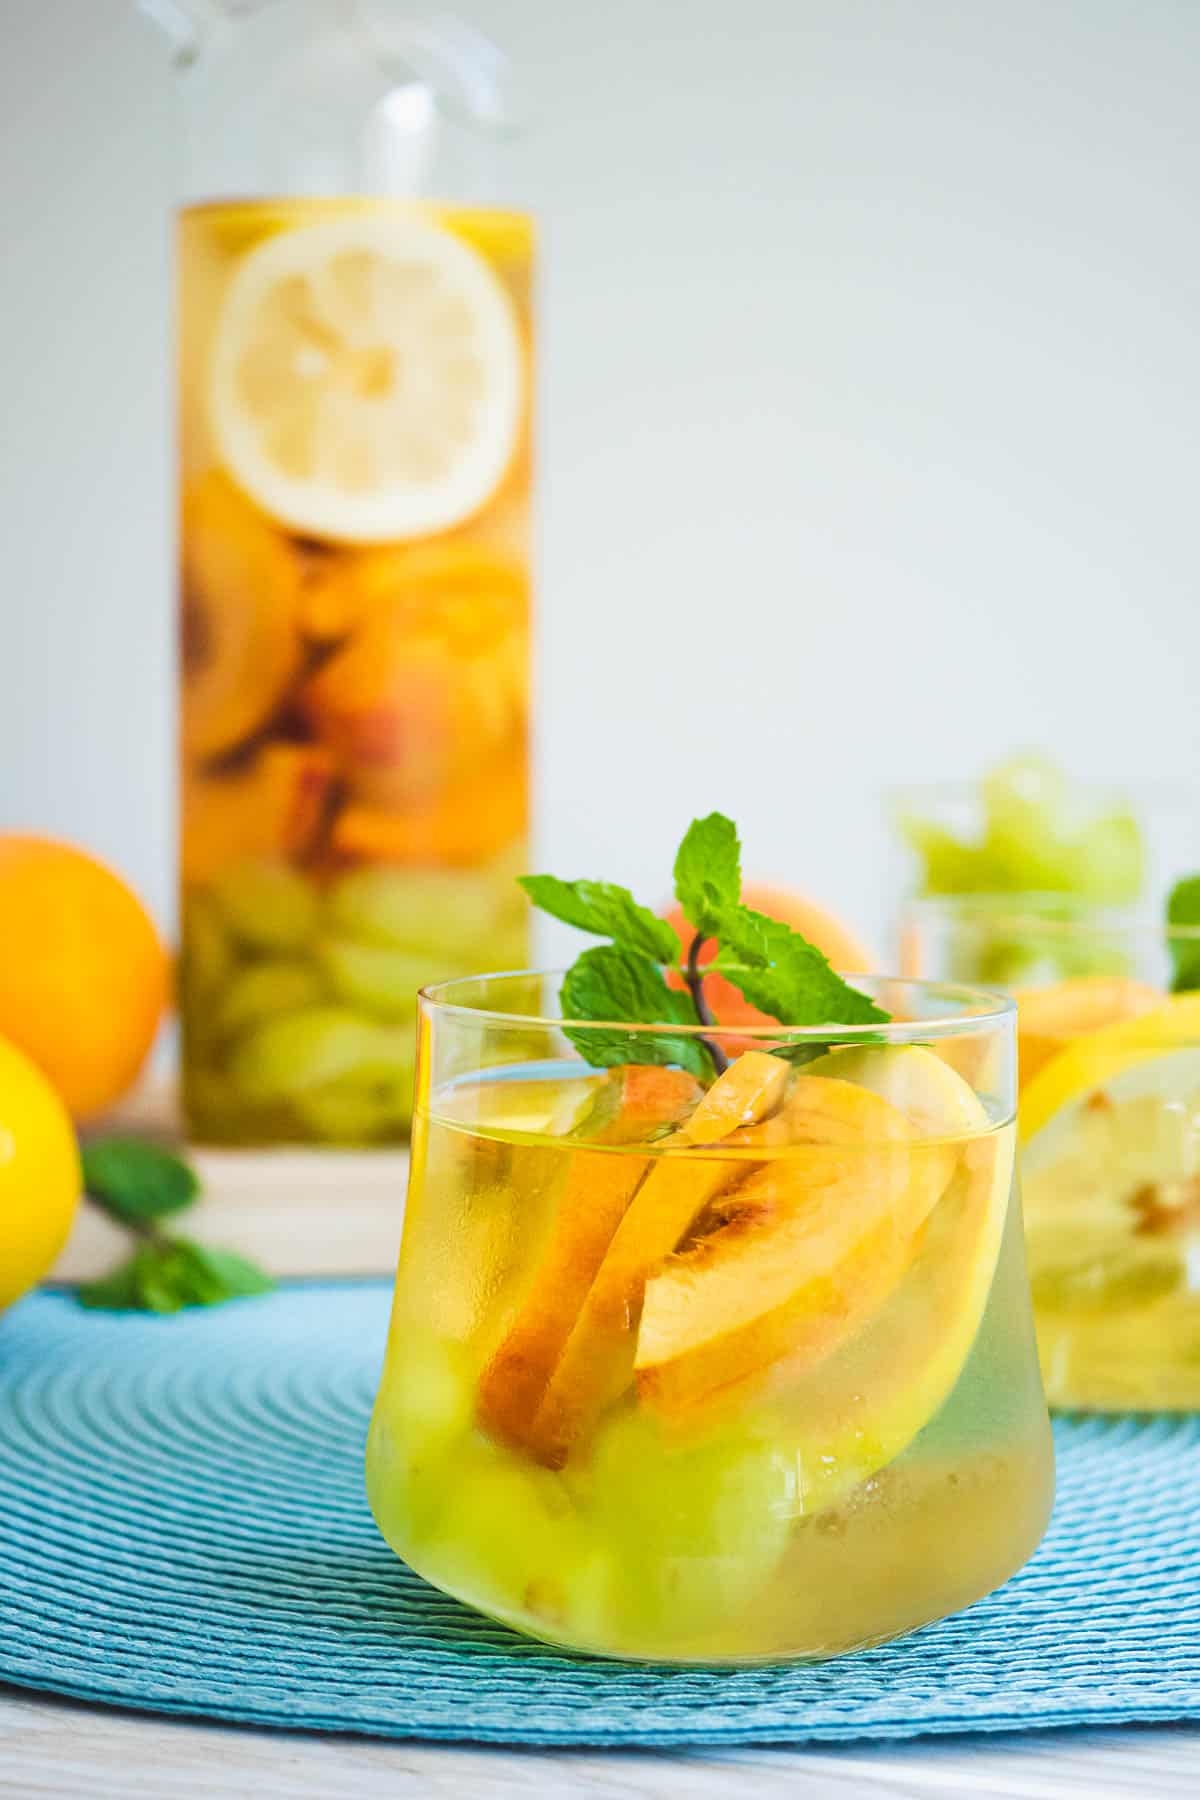 Glass of white wine sangria with sliced peaches, a garnish of fresh mint, and a pitcher with more sangria in the background.